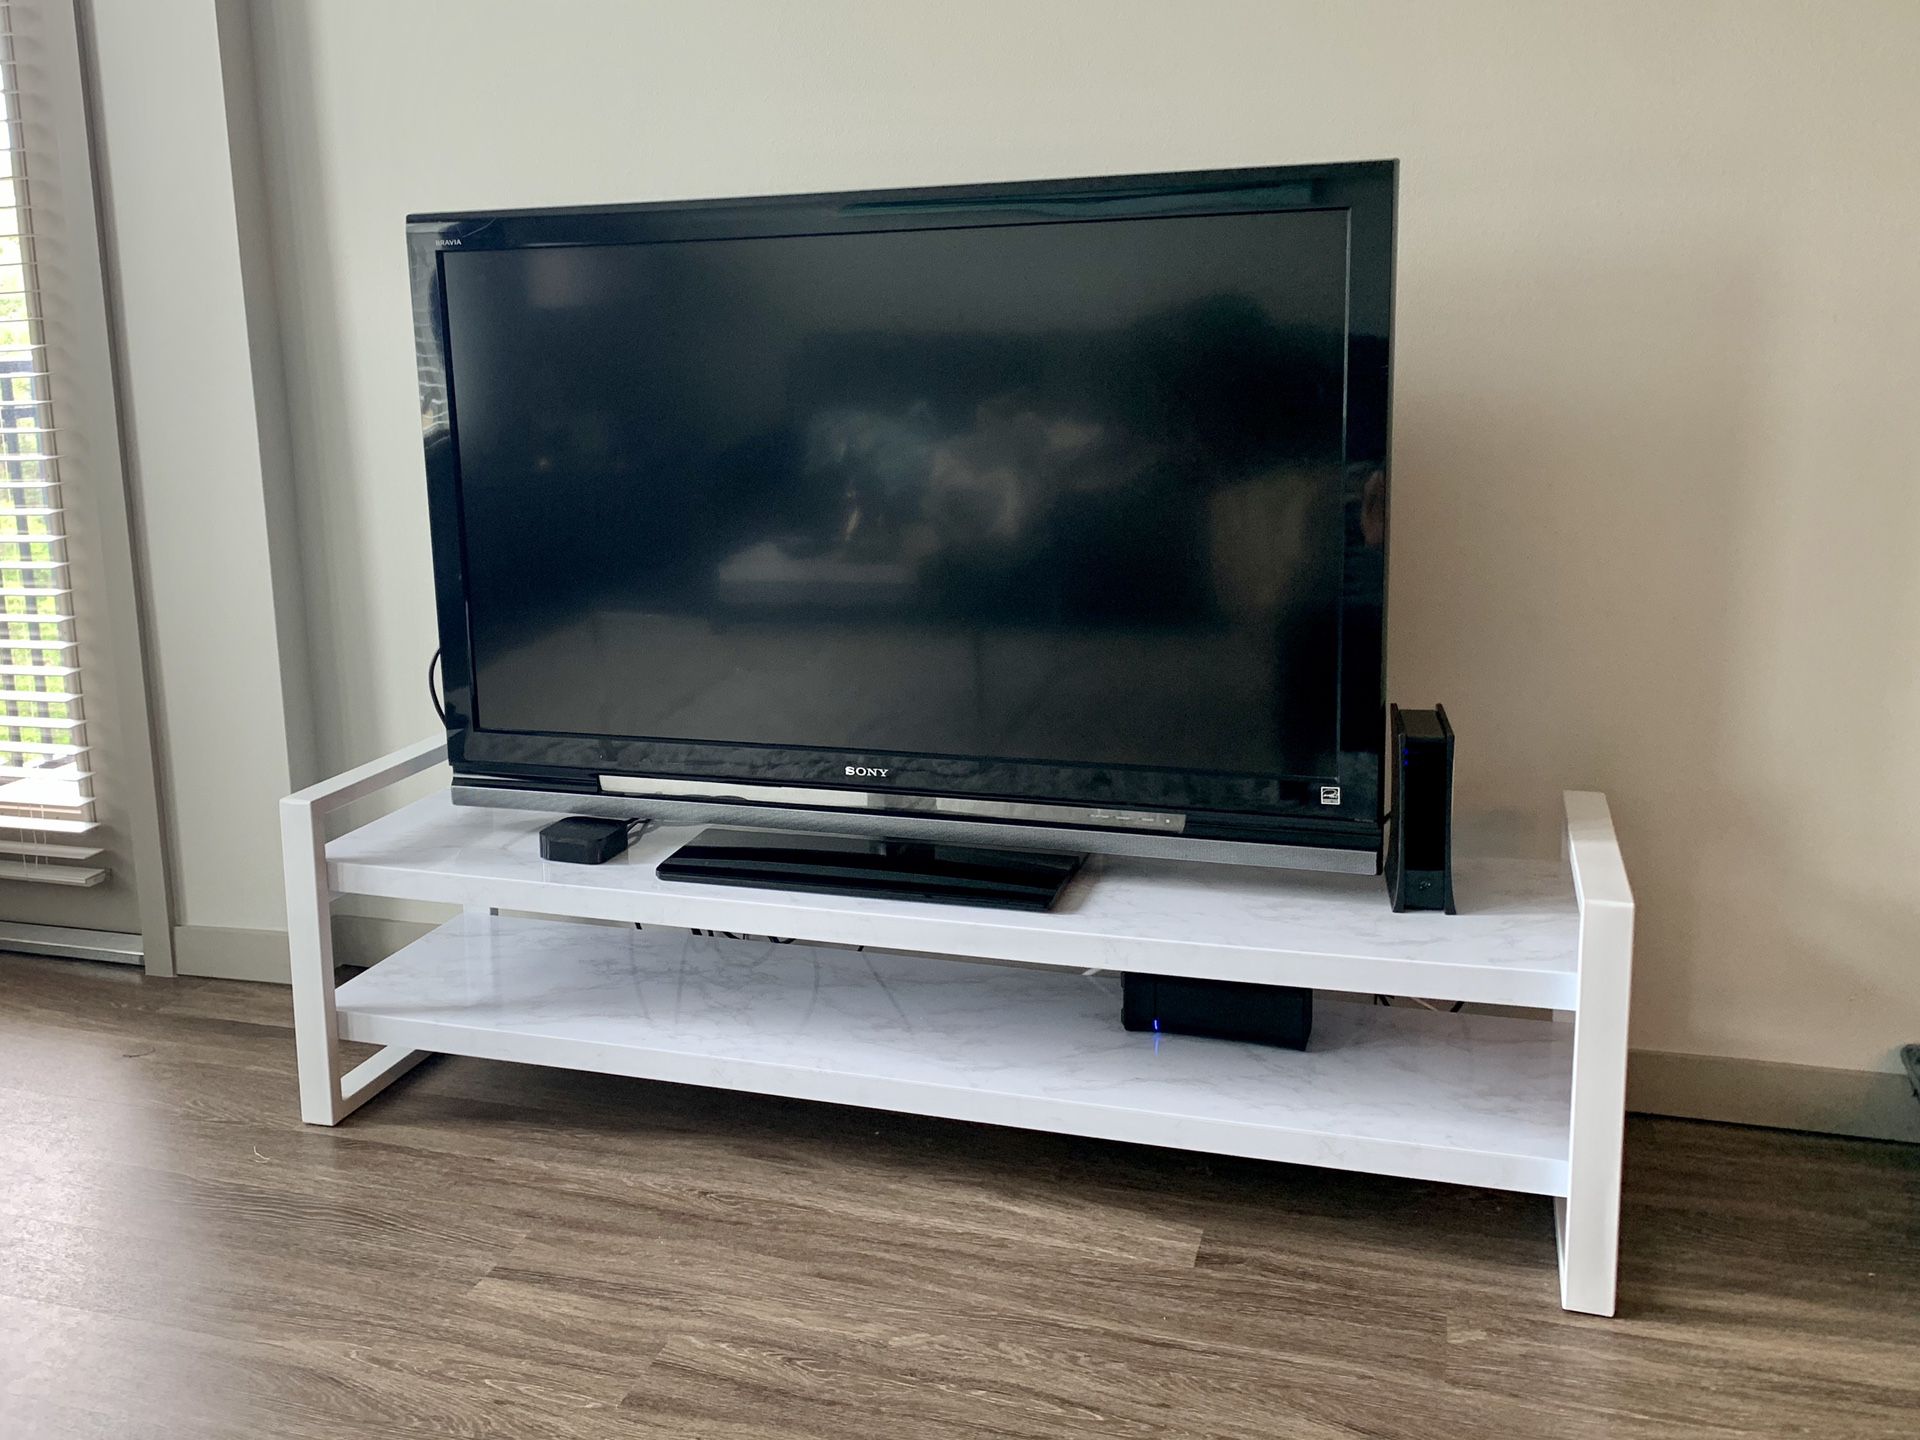 Sony TV - TV Stand (Set or Separate)